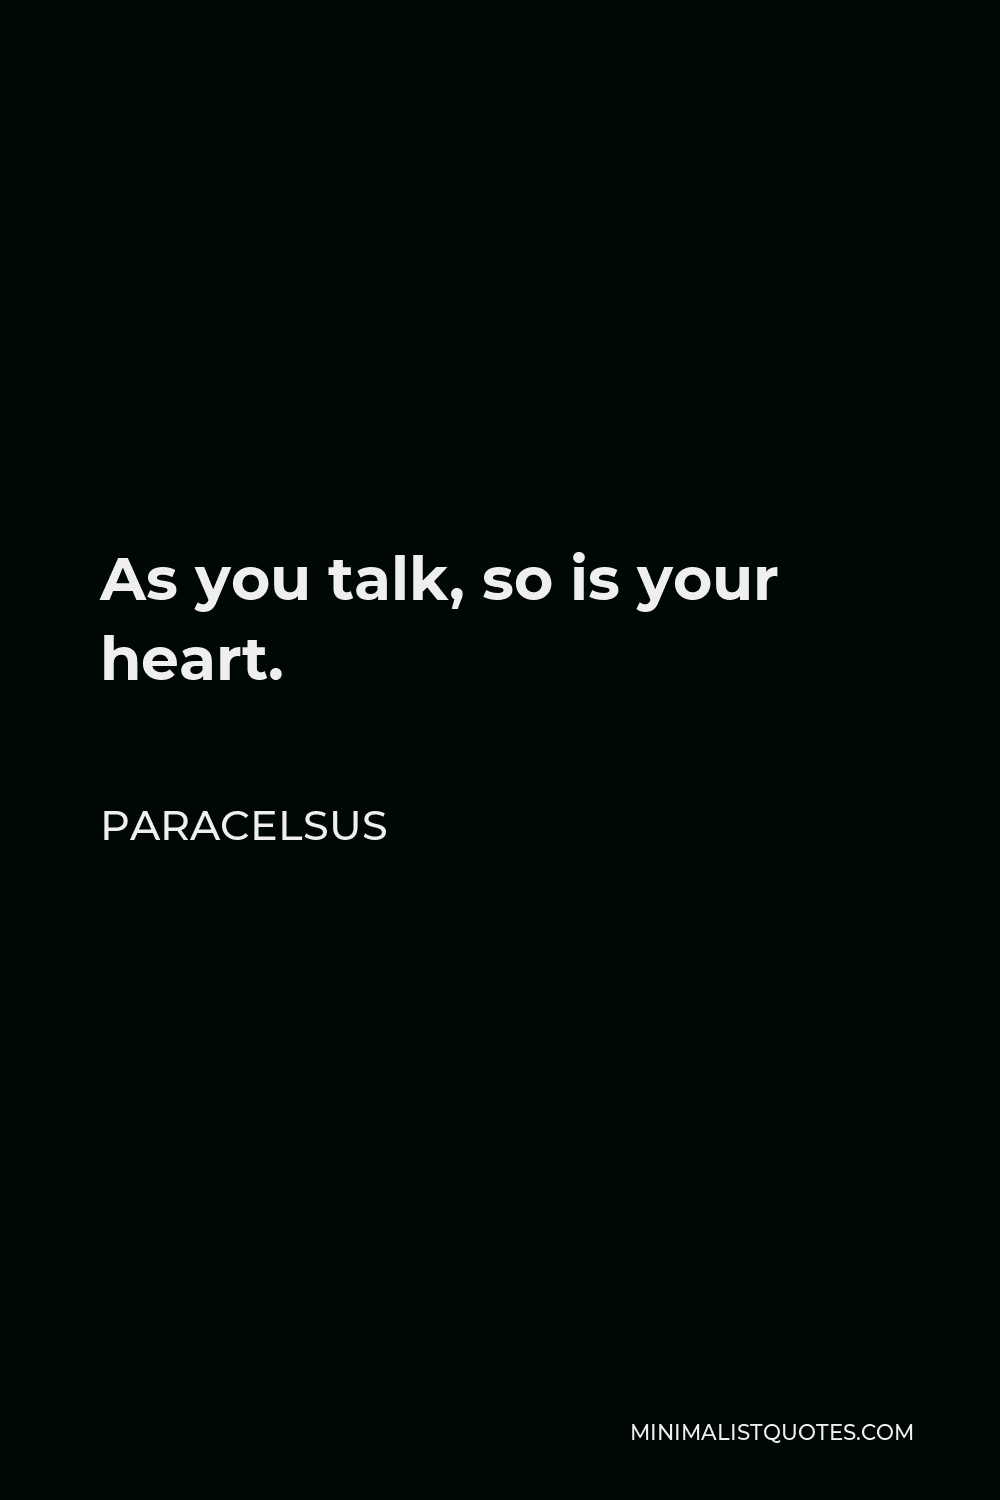 Paracelsus Quote - As you talk, so is your heart.